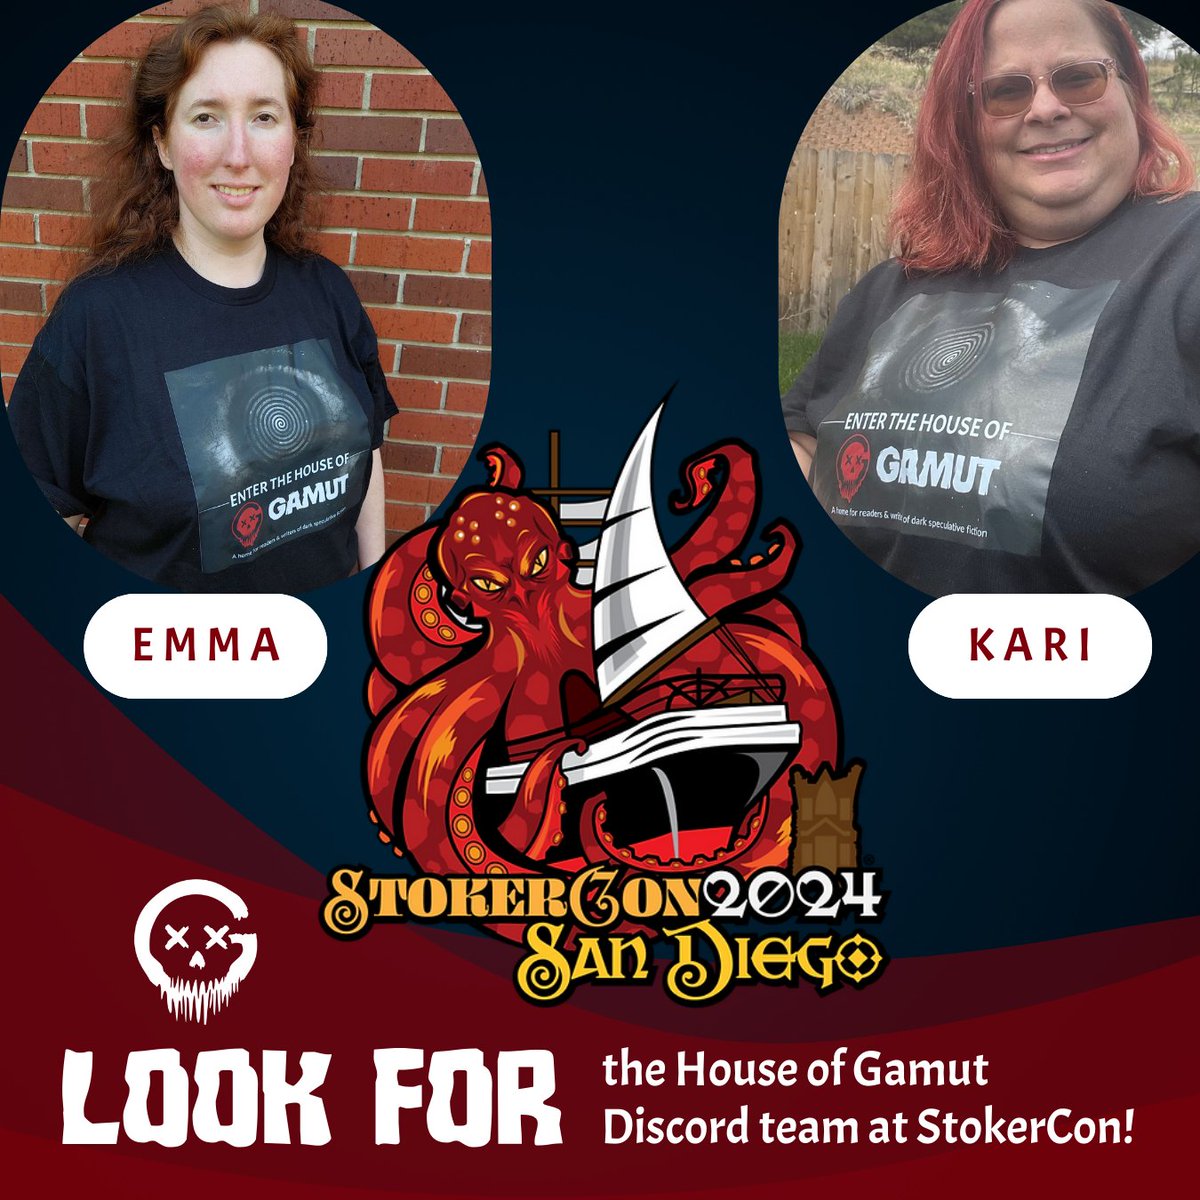 Headed to 𝙎𝙩𝙤𝙠𝙚𝙧𝘾𝙤𝙣? Keep an eye out for Kari & Emma—our awesome Discord team! They’ll be passing out some fun Gamut swag and are excited to meet you. Plus, be on the lookout for a special Gamut Magazine deal in the StokerCon Souvenir Book…👀